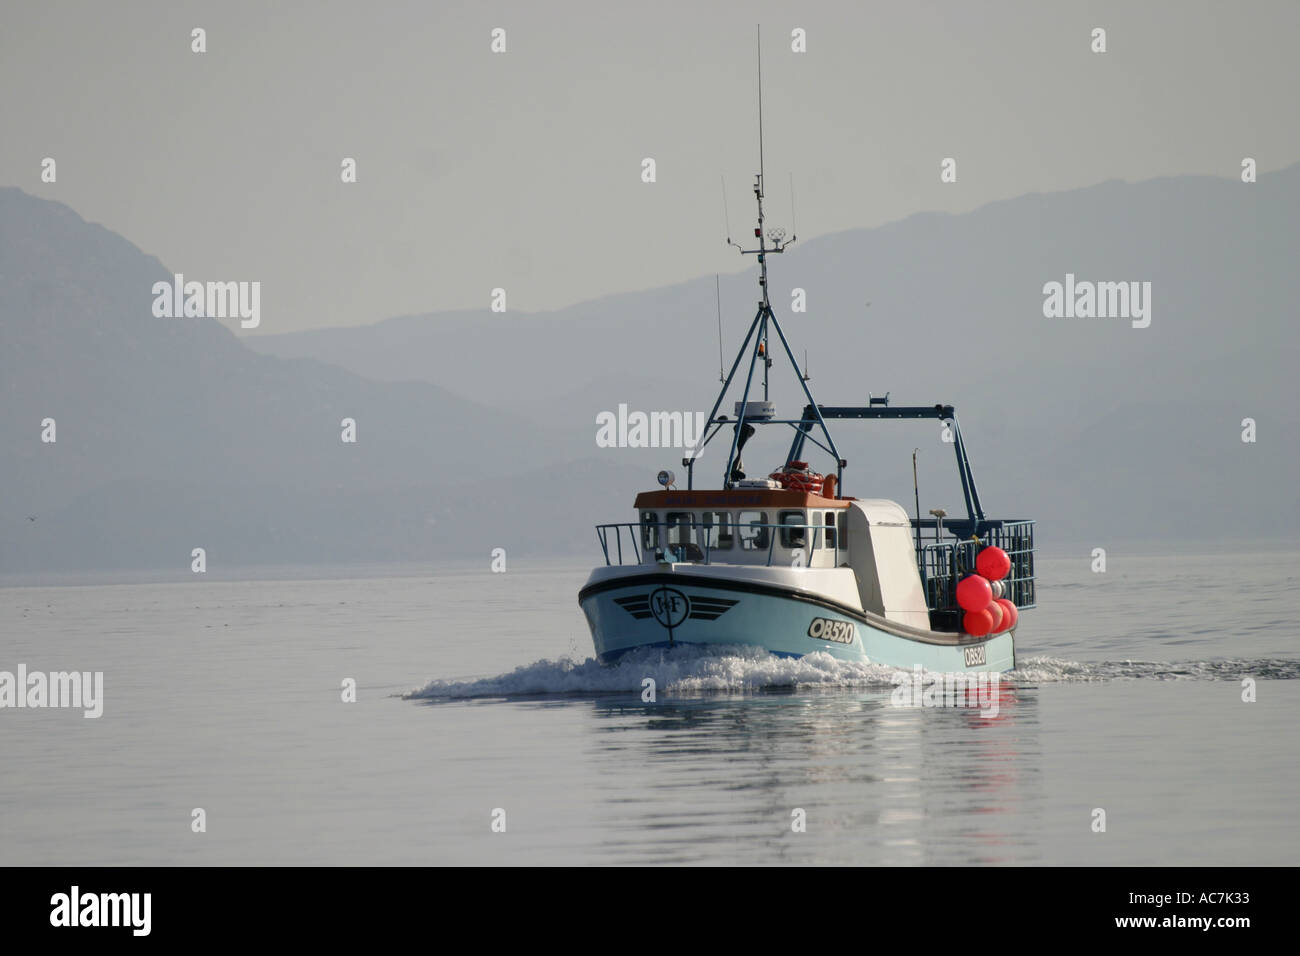 Creel fishing boat in the Firth of Lorne off Scotlands West Coast